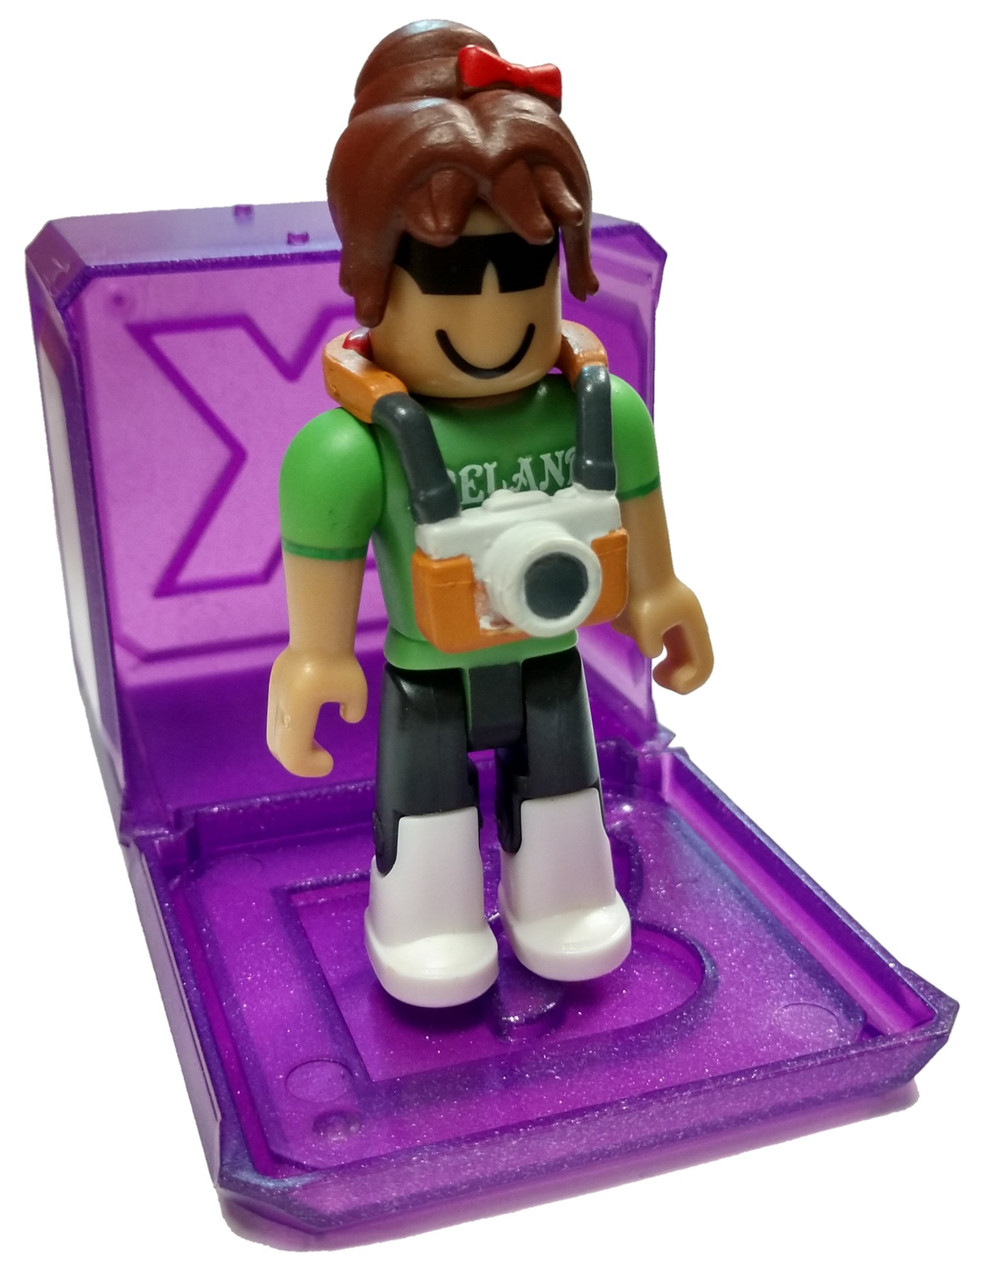 Roblox Celebrity Collection Series 3 World Expedition Ireland Itinerant 3 Mini Figure With Cube And Online Code Loose Jazwares Toywiz - roblox toys series 3 celebrity